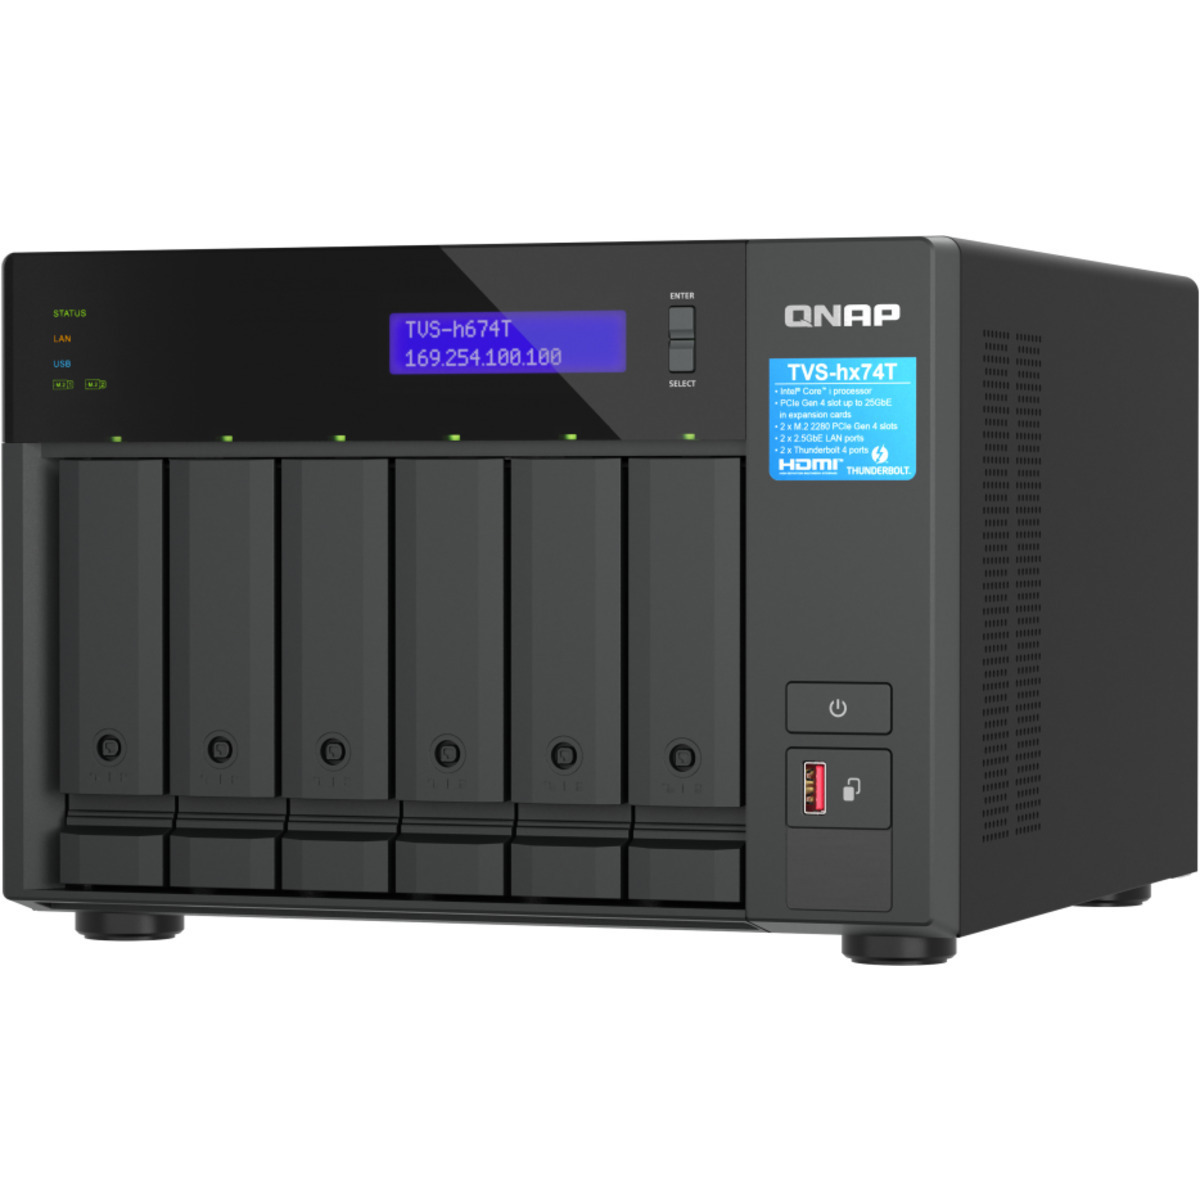 buy QNAP TVS-h674T Core i5 Thunderbolt 4 24tb Desktop DAS-NAS - Combo Direct + Network Storage Device 6x4000gb Toshiba MN Series MN08ADA400E 3.5 7200rpm SATA 6Gb/s HDD NAS Class Drives Installed - Burn-In Tested - ON SALE - nas headquarters buy network attached storage server device das new raid-5 free shipping simply usa christmas holiday black friday cyber monday week sale happening now! TVS-h674T Core i5 Thunderbolt 4